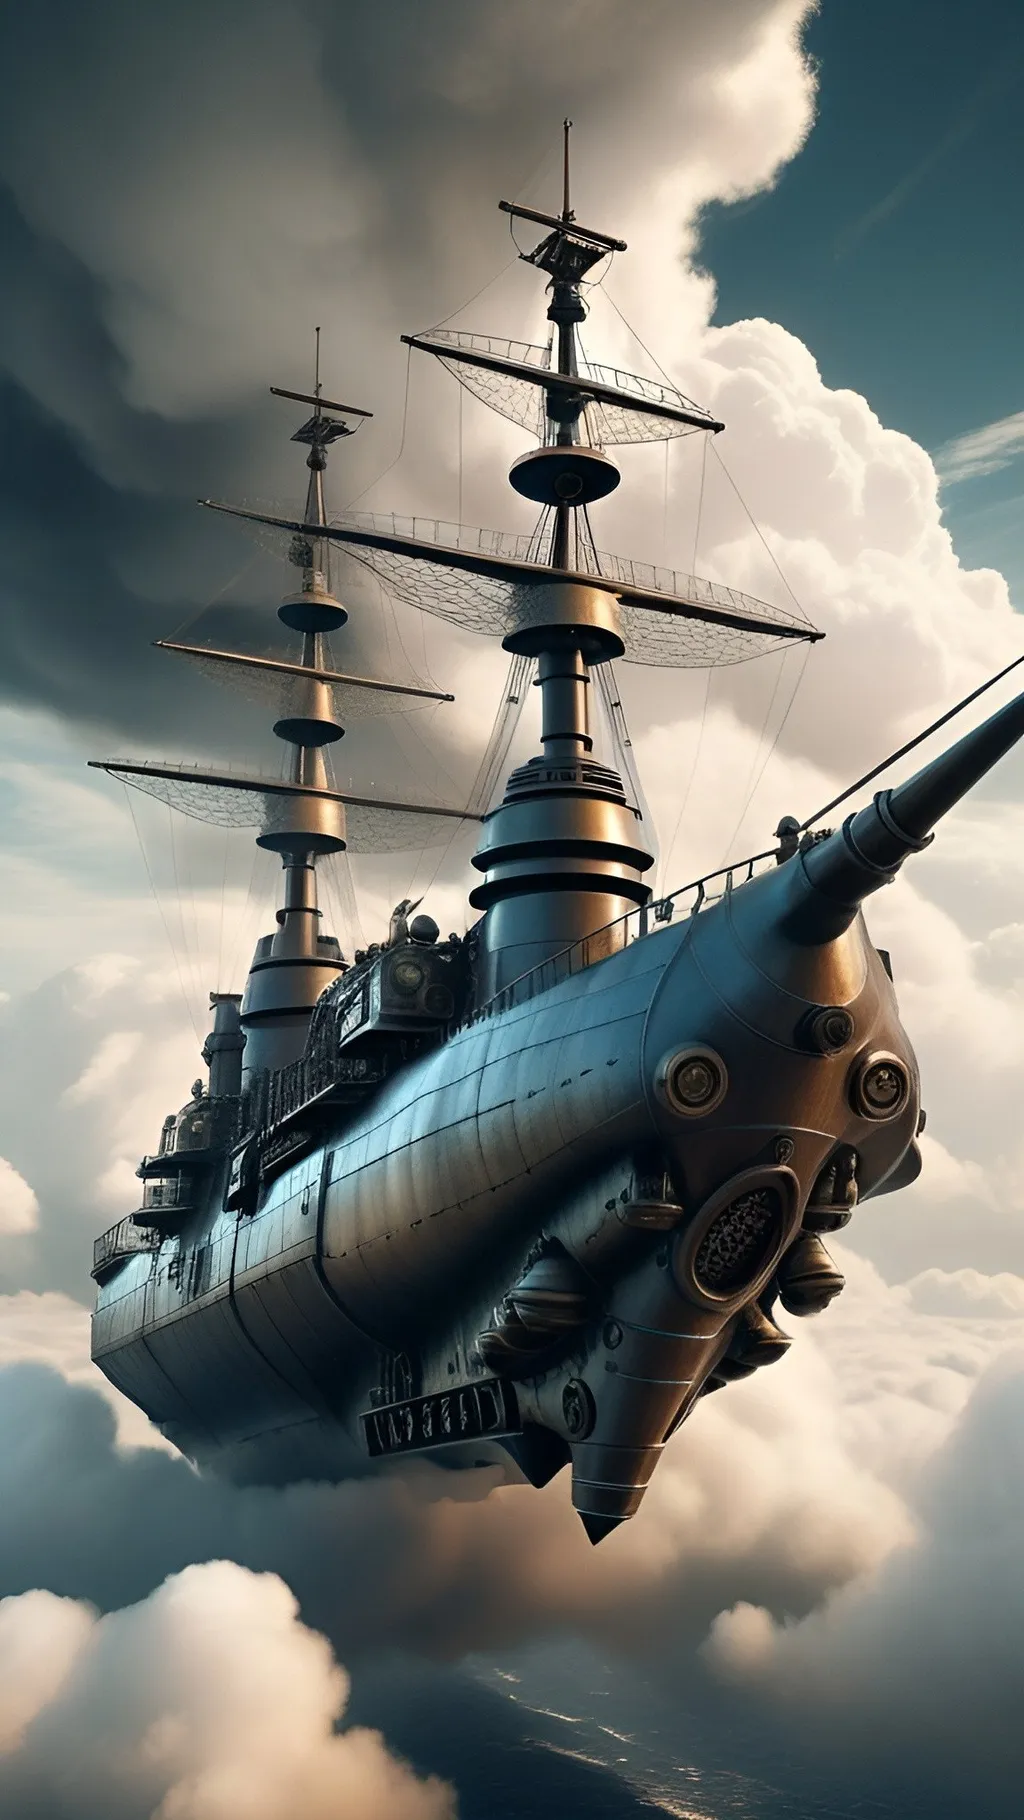 Prompt: (A mighty battle frigate flying through the clouds in dieselpunk style:1.5), (dramatic sky:1.2), (clouds:1.2), (industrial aesthetic:1.3), (steampunk elements:1.1), (detailed machinery:1.2), (metallic textures:1.2), (vintage technology:1.2), (futuristic design:1.2), (highly detailed:1.3), (fantasy setting:1.1), (epic scene:1.3)


